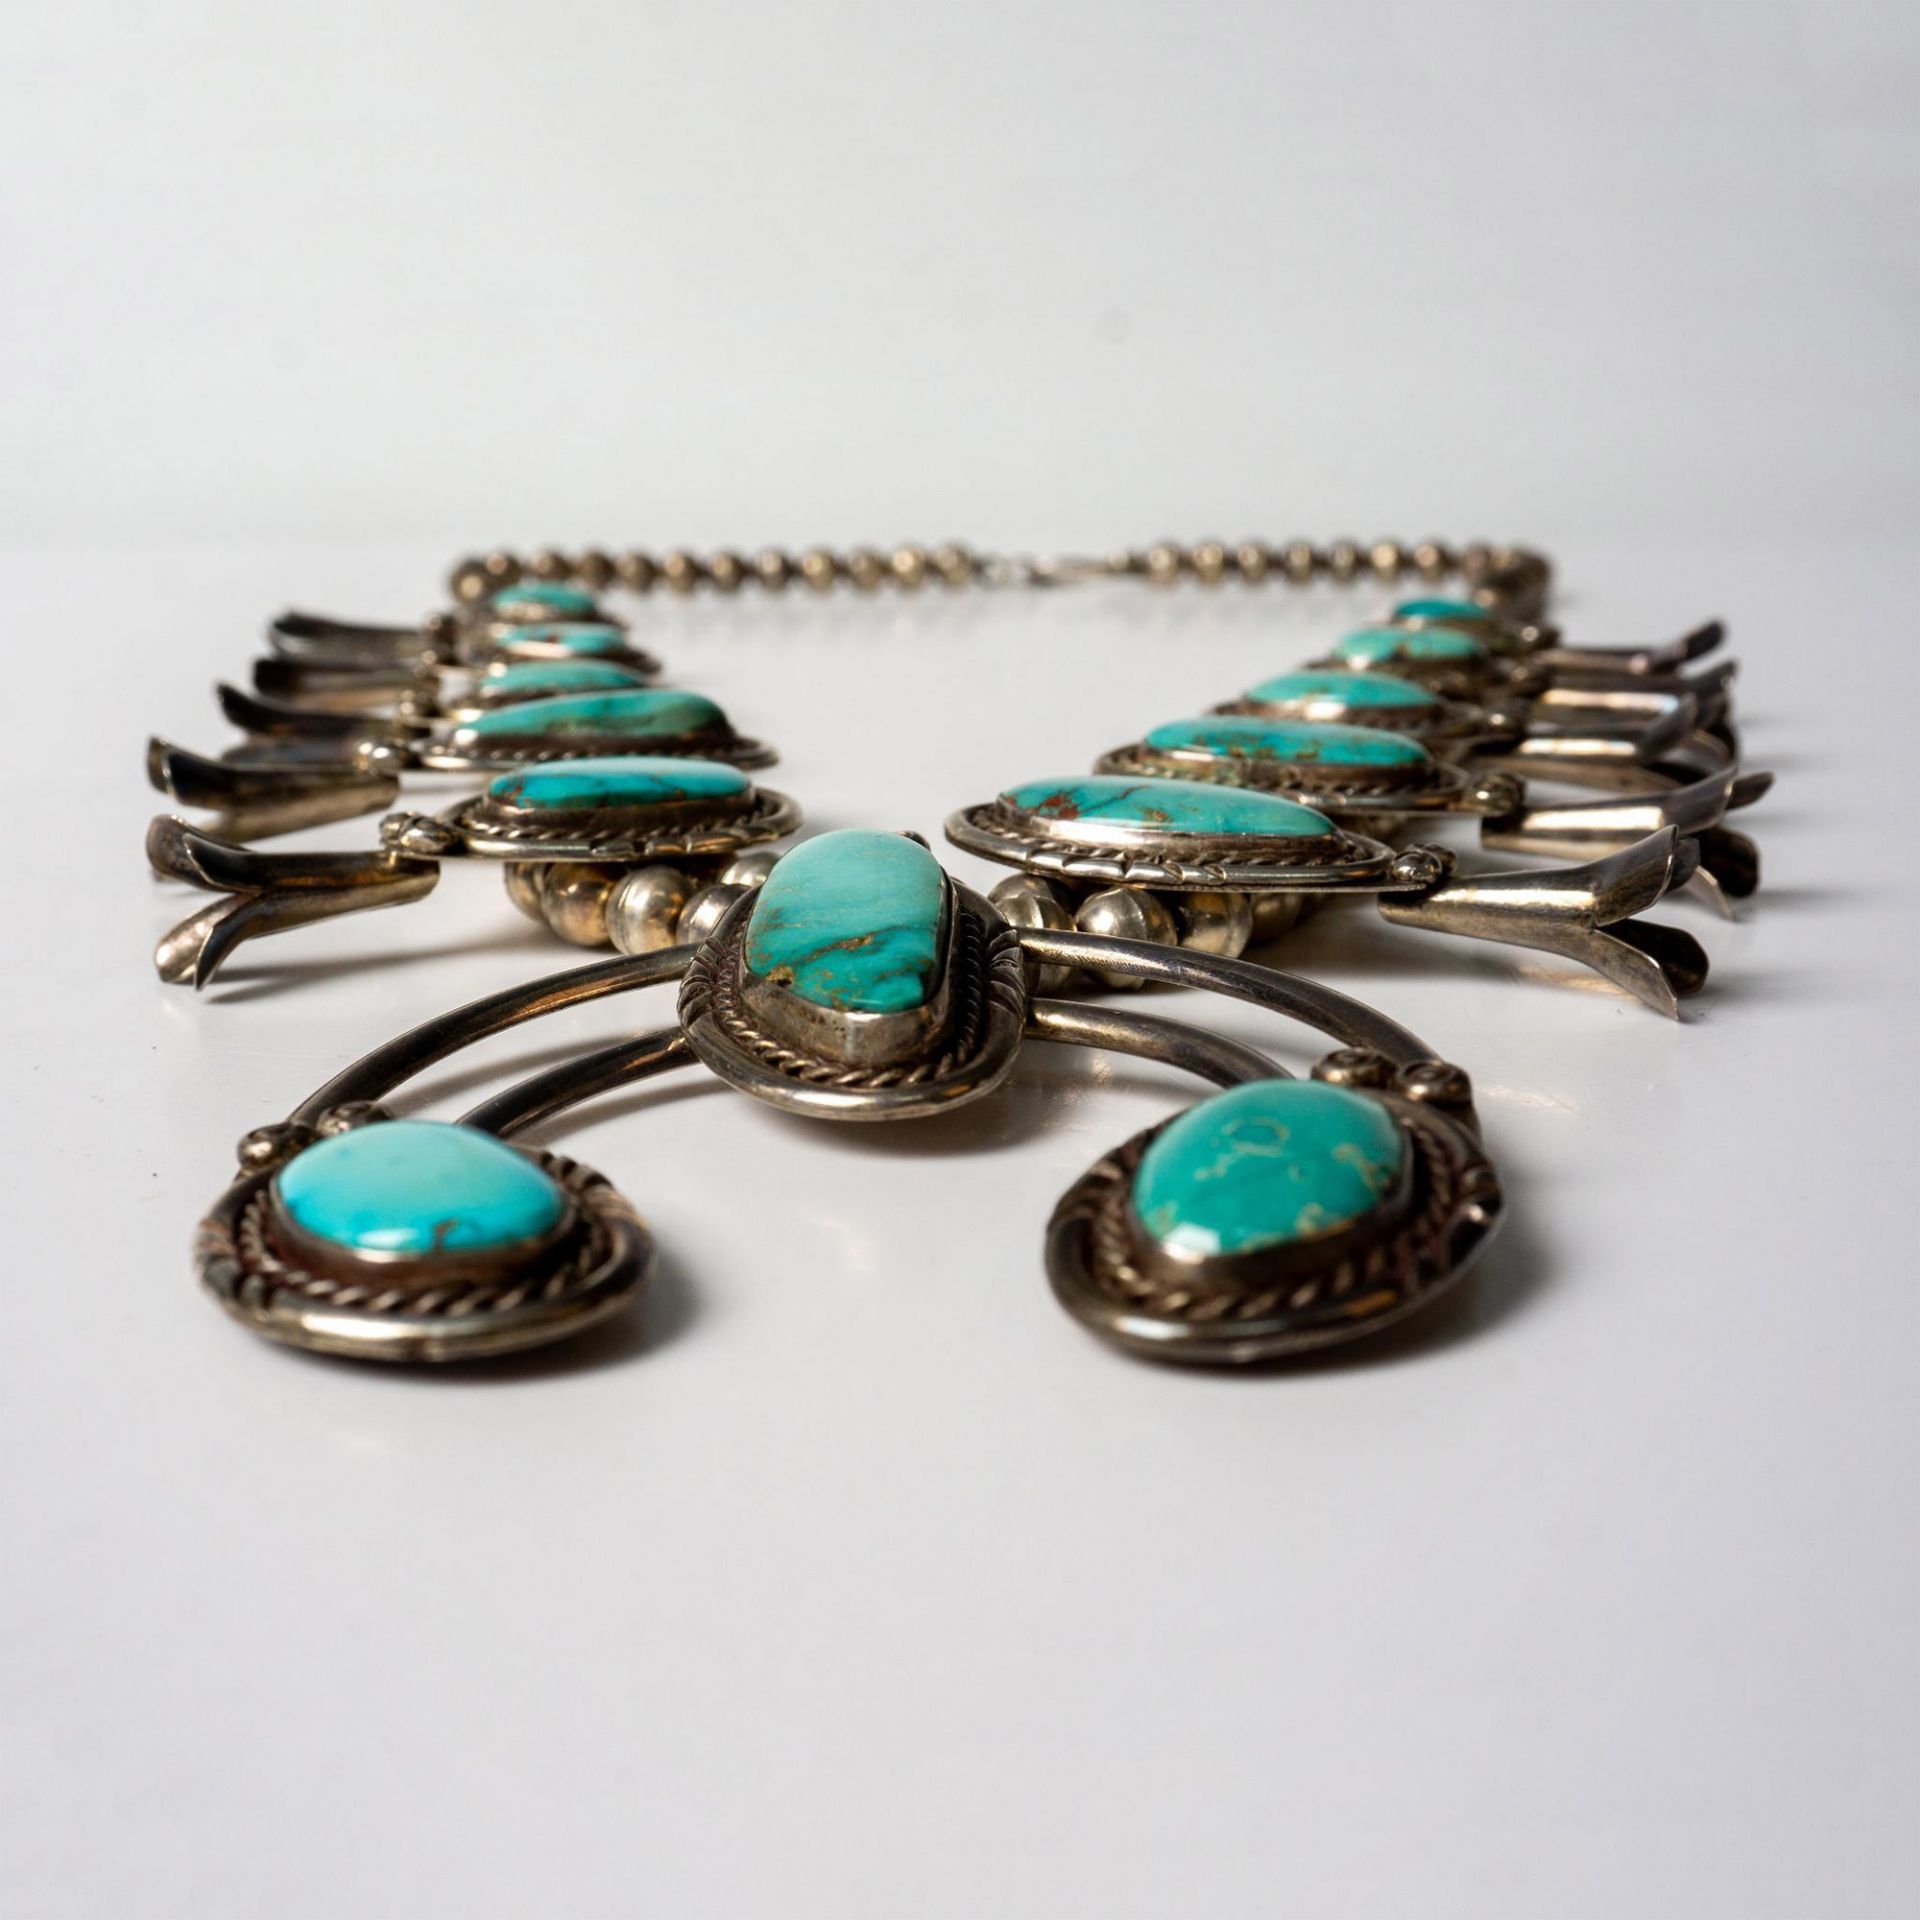 Navajo Sterling Squash Blossom Necklace - Image 2 of 5